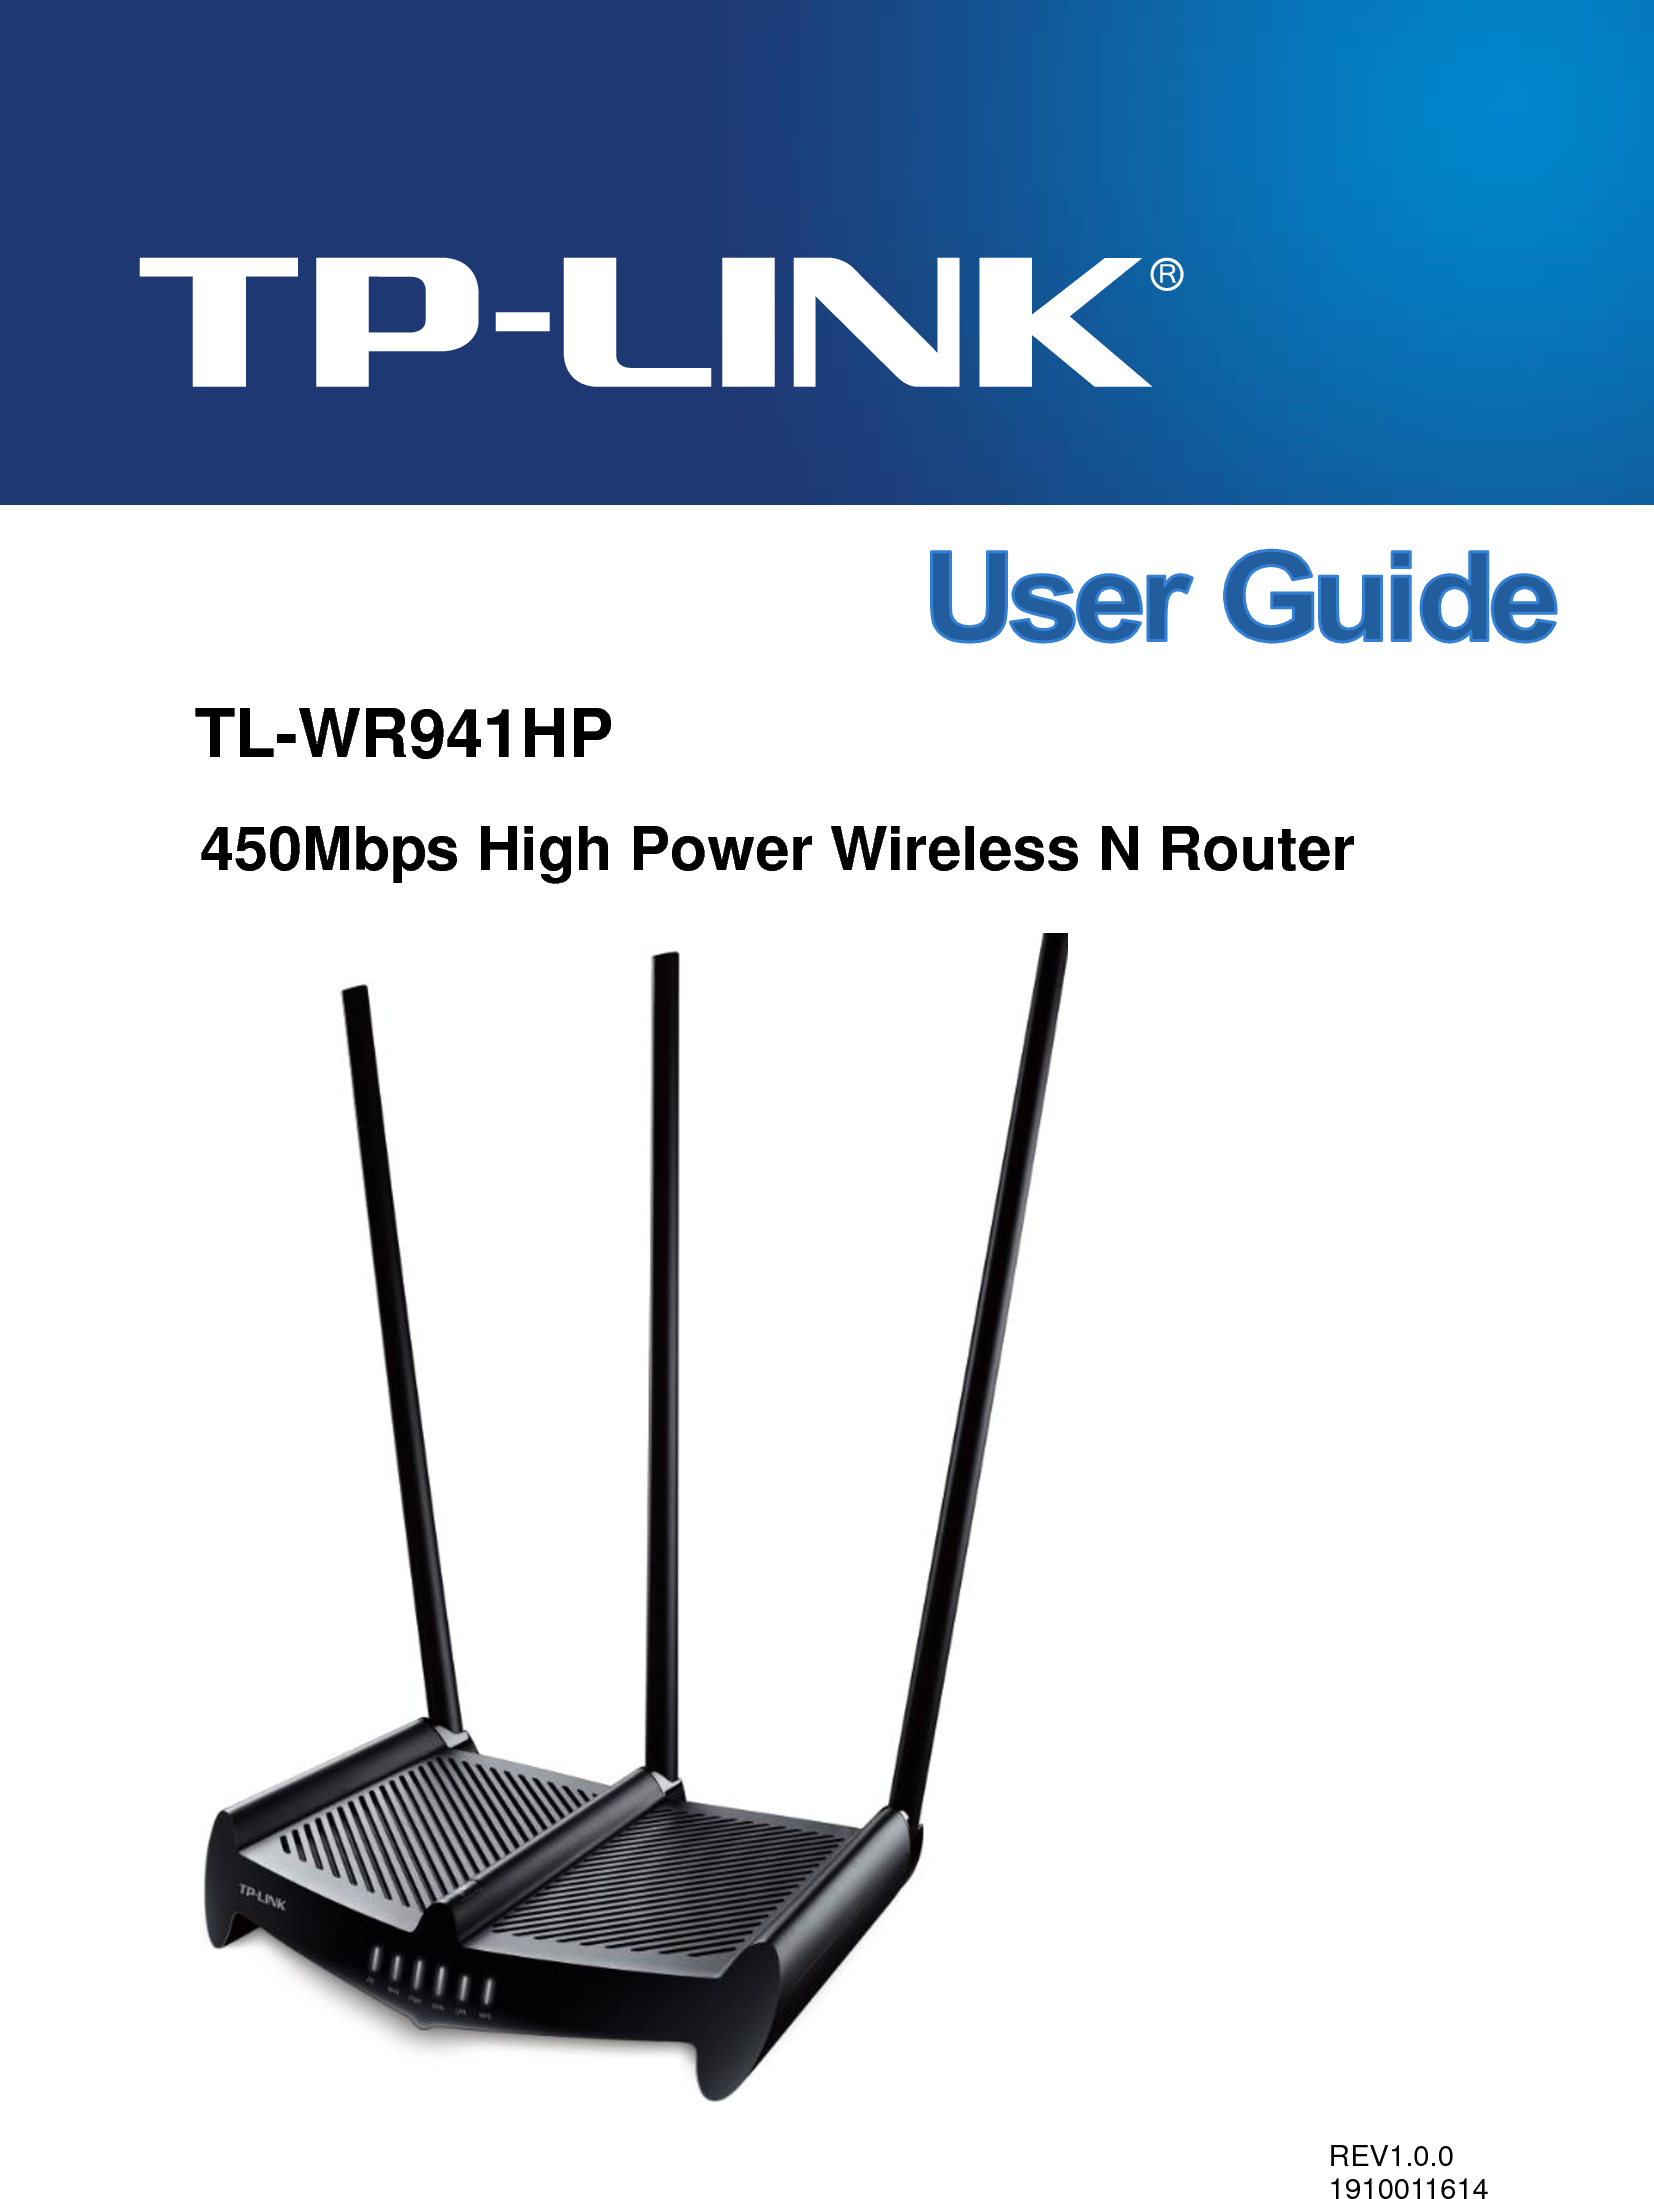      TL-WR941HP  450Mbps High Power Wireless N Router    REV1.0.0 1910011614 